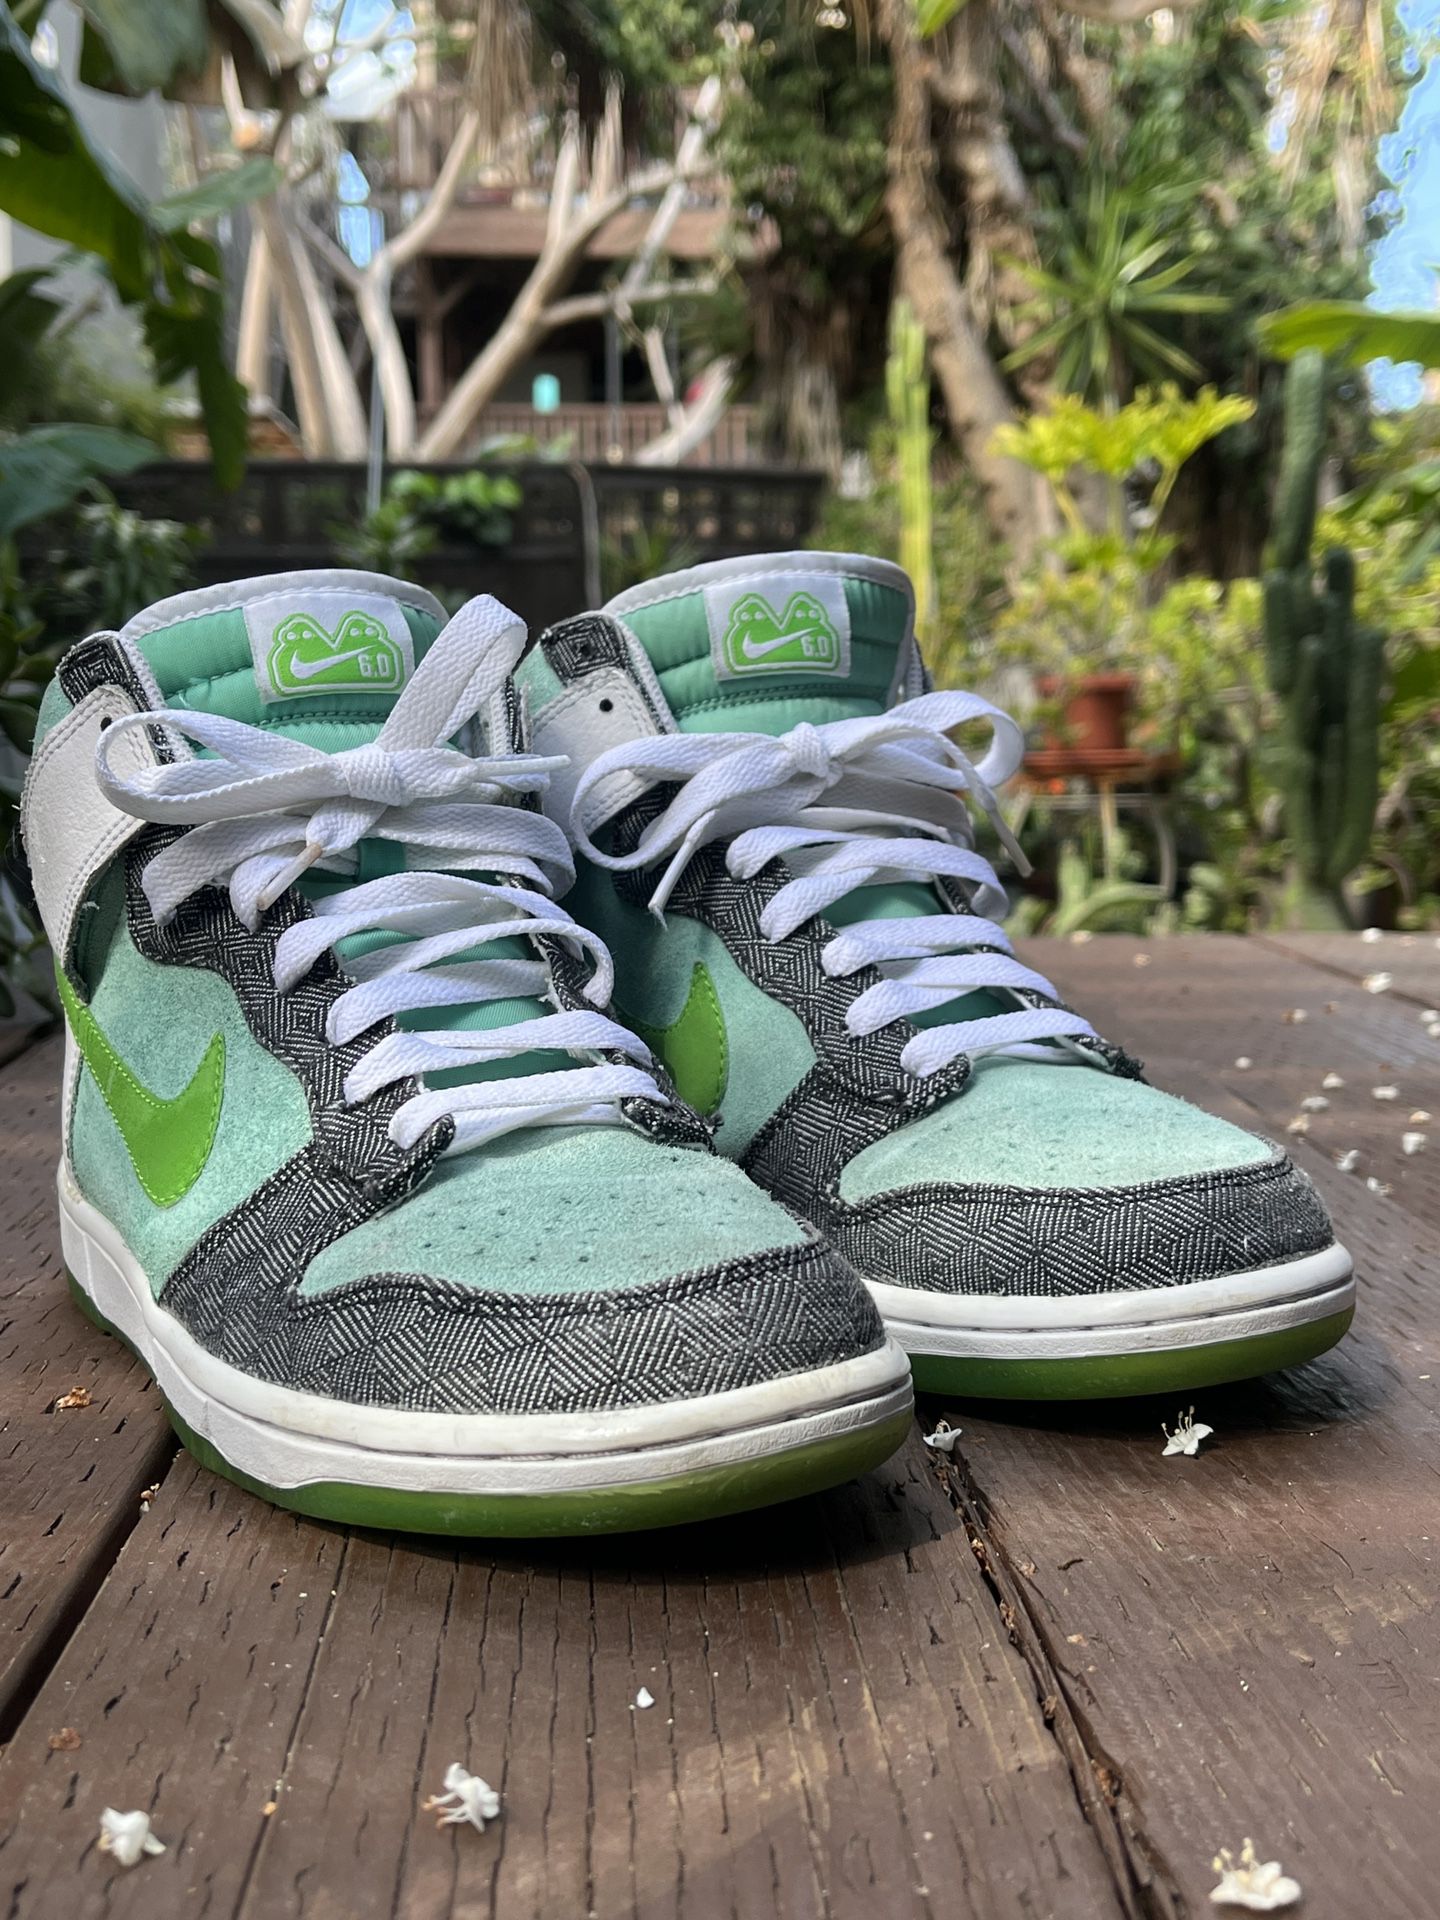 Nike 6.0 Dunk Shoes for Sale in San CA - OfferUp